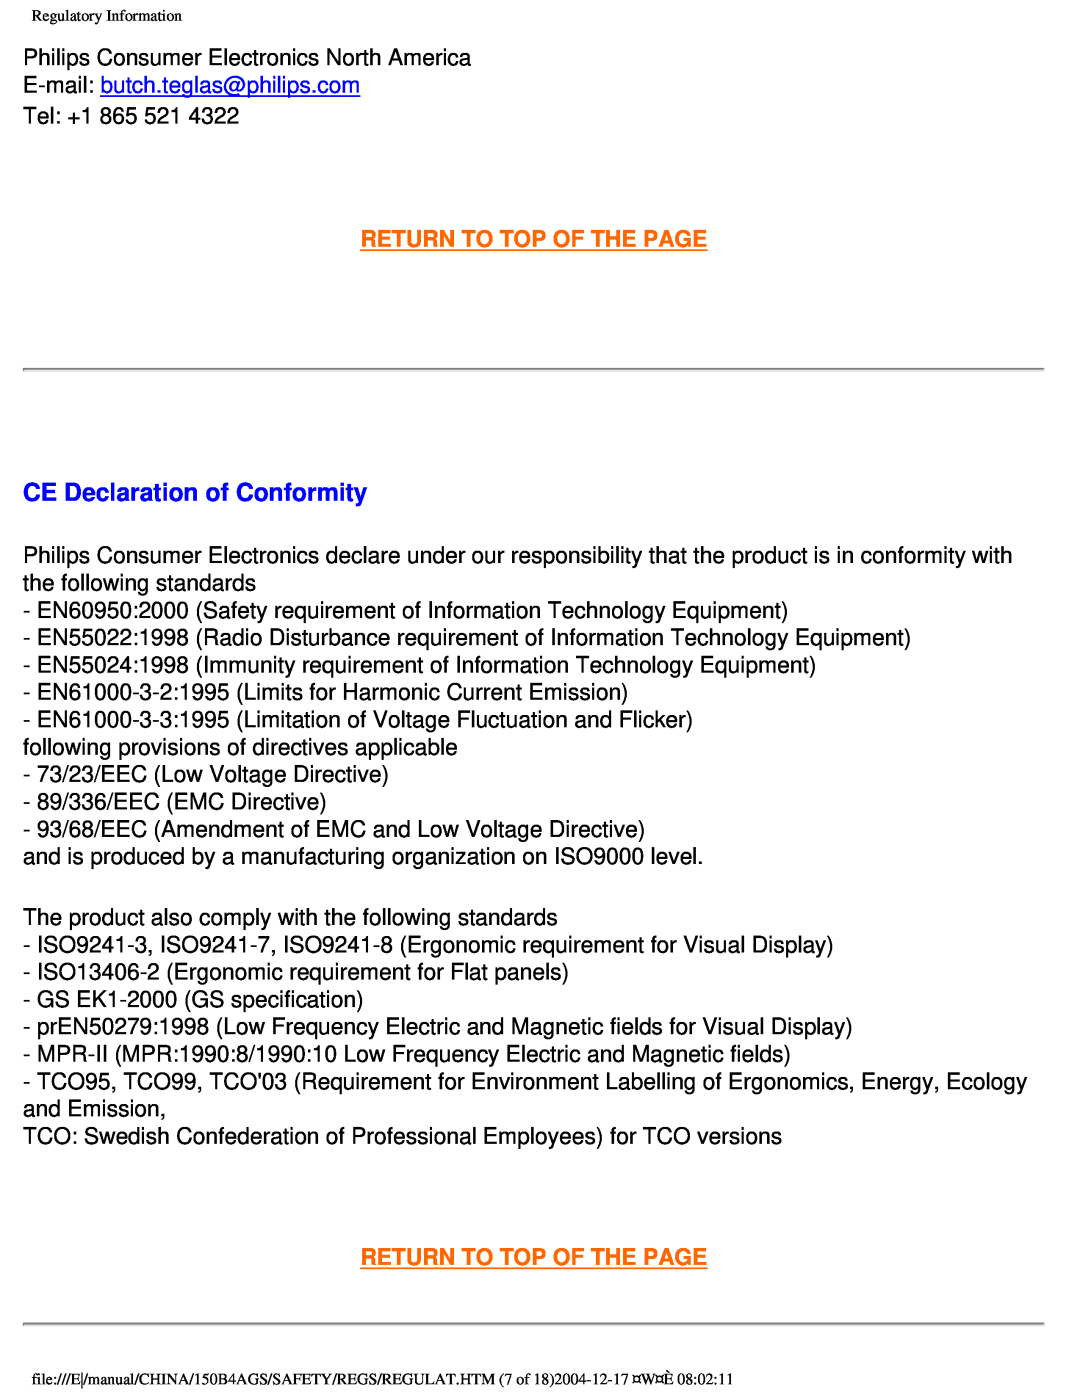 Philips 150B4AG, 150B4AS user manual CE Declaration of Conformity, Return To Top Of The Page 